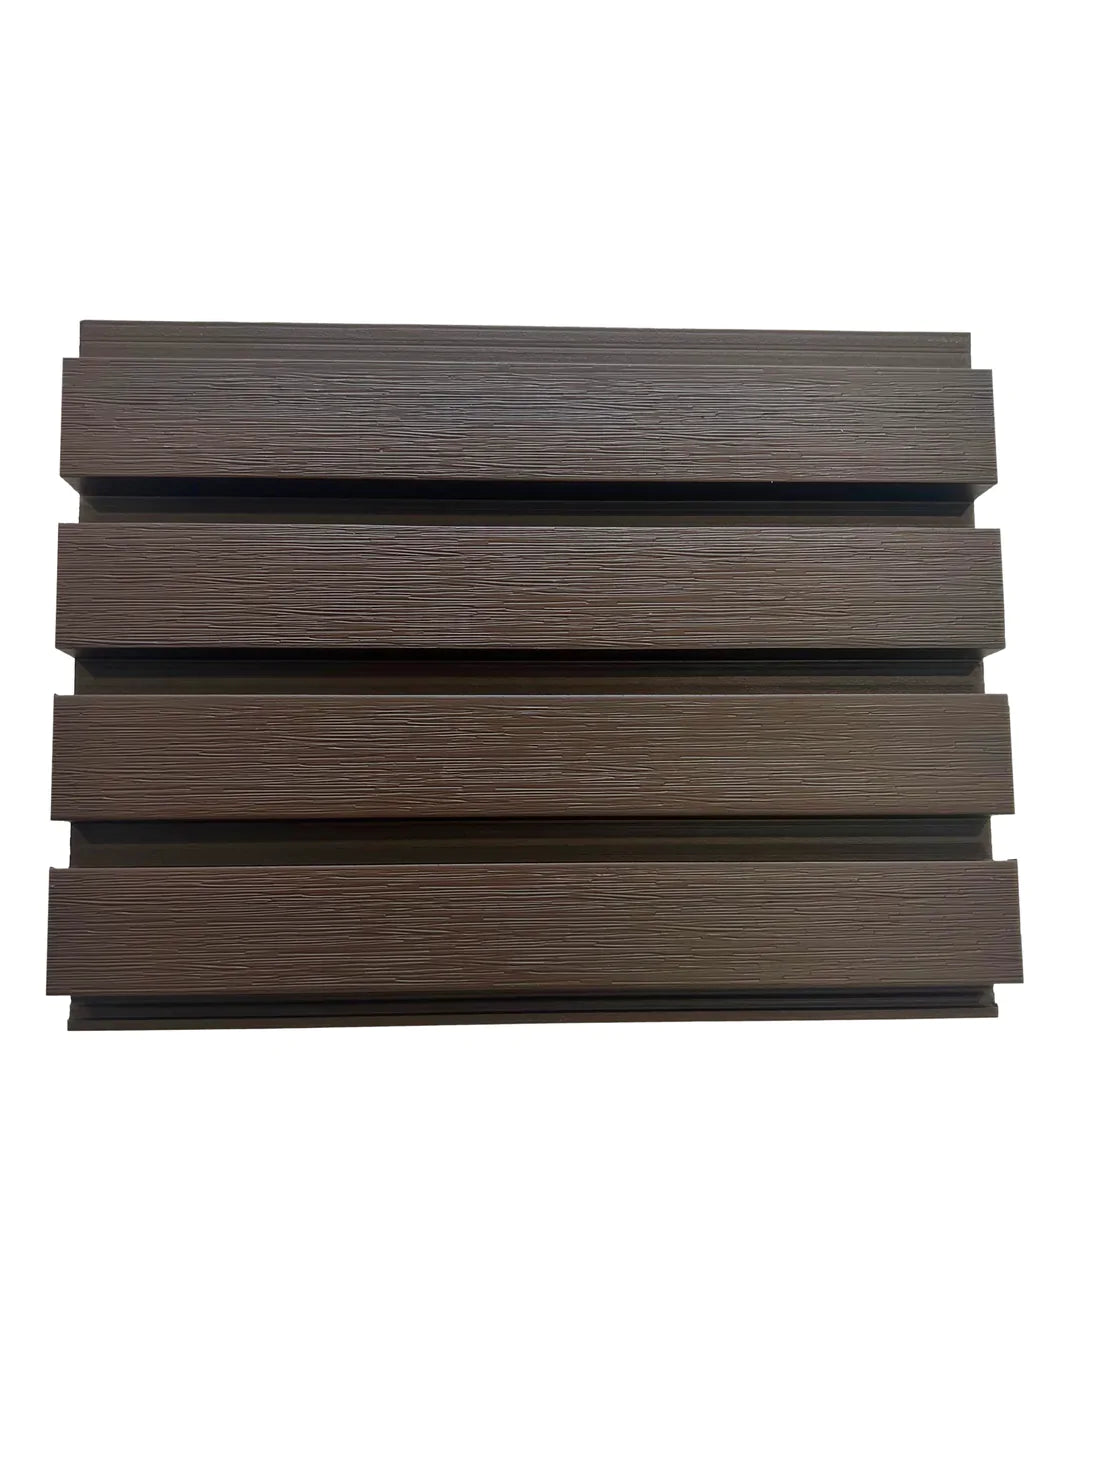 Composite Slatted Cladding Red Brown Sample - Series 1